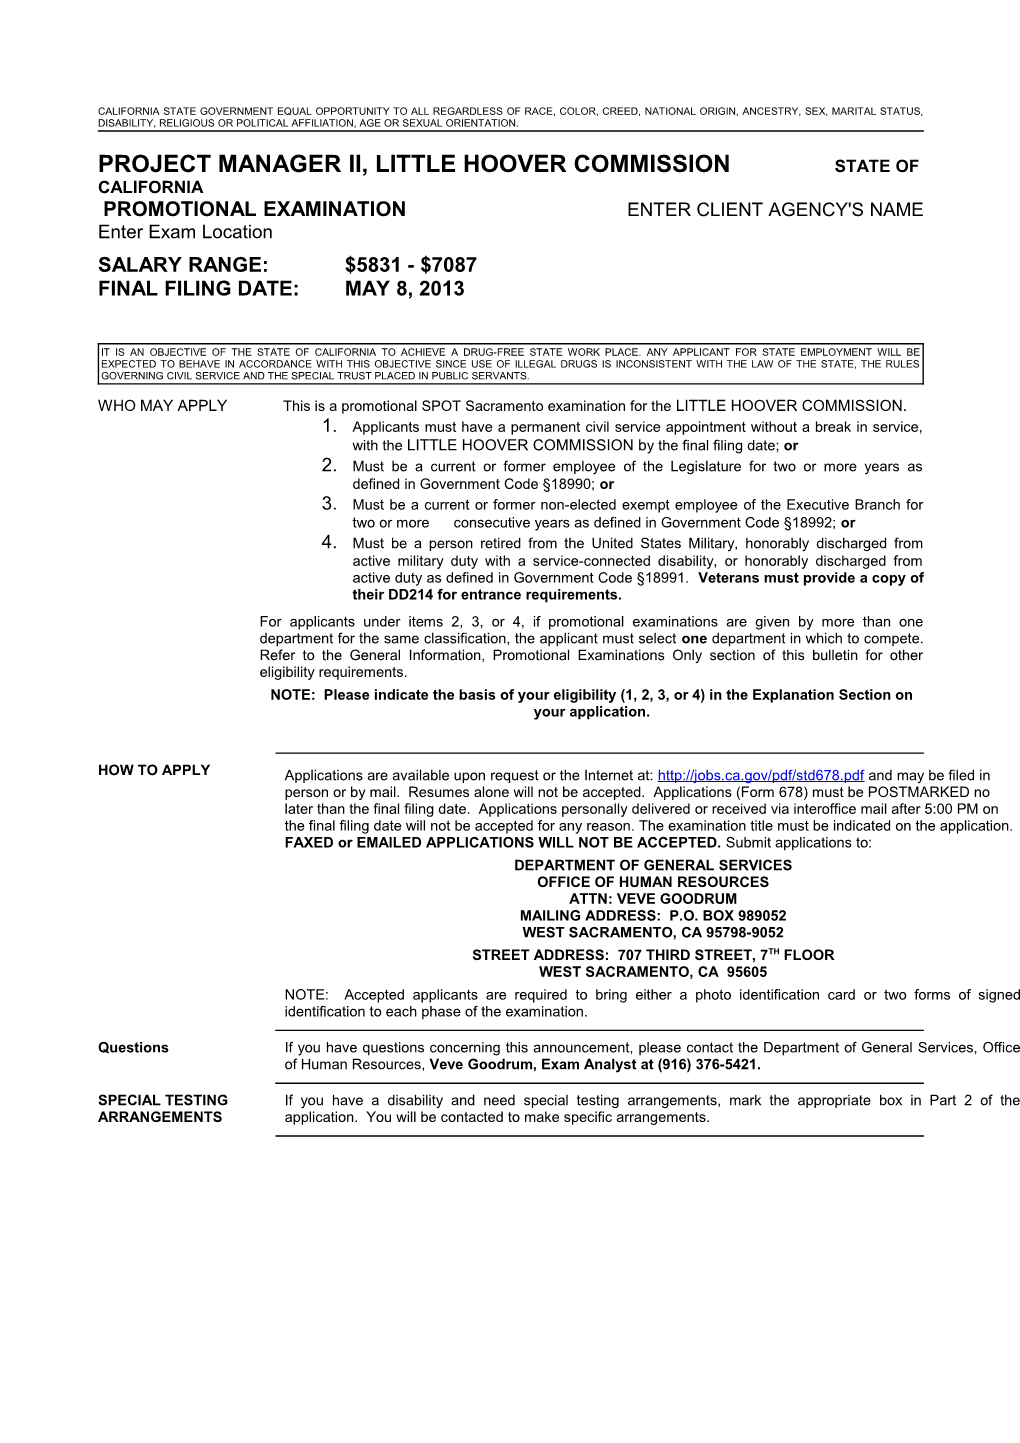 Project Manager Ii, Little Hoover Commission State of California